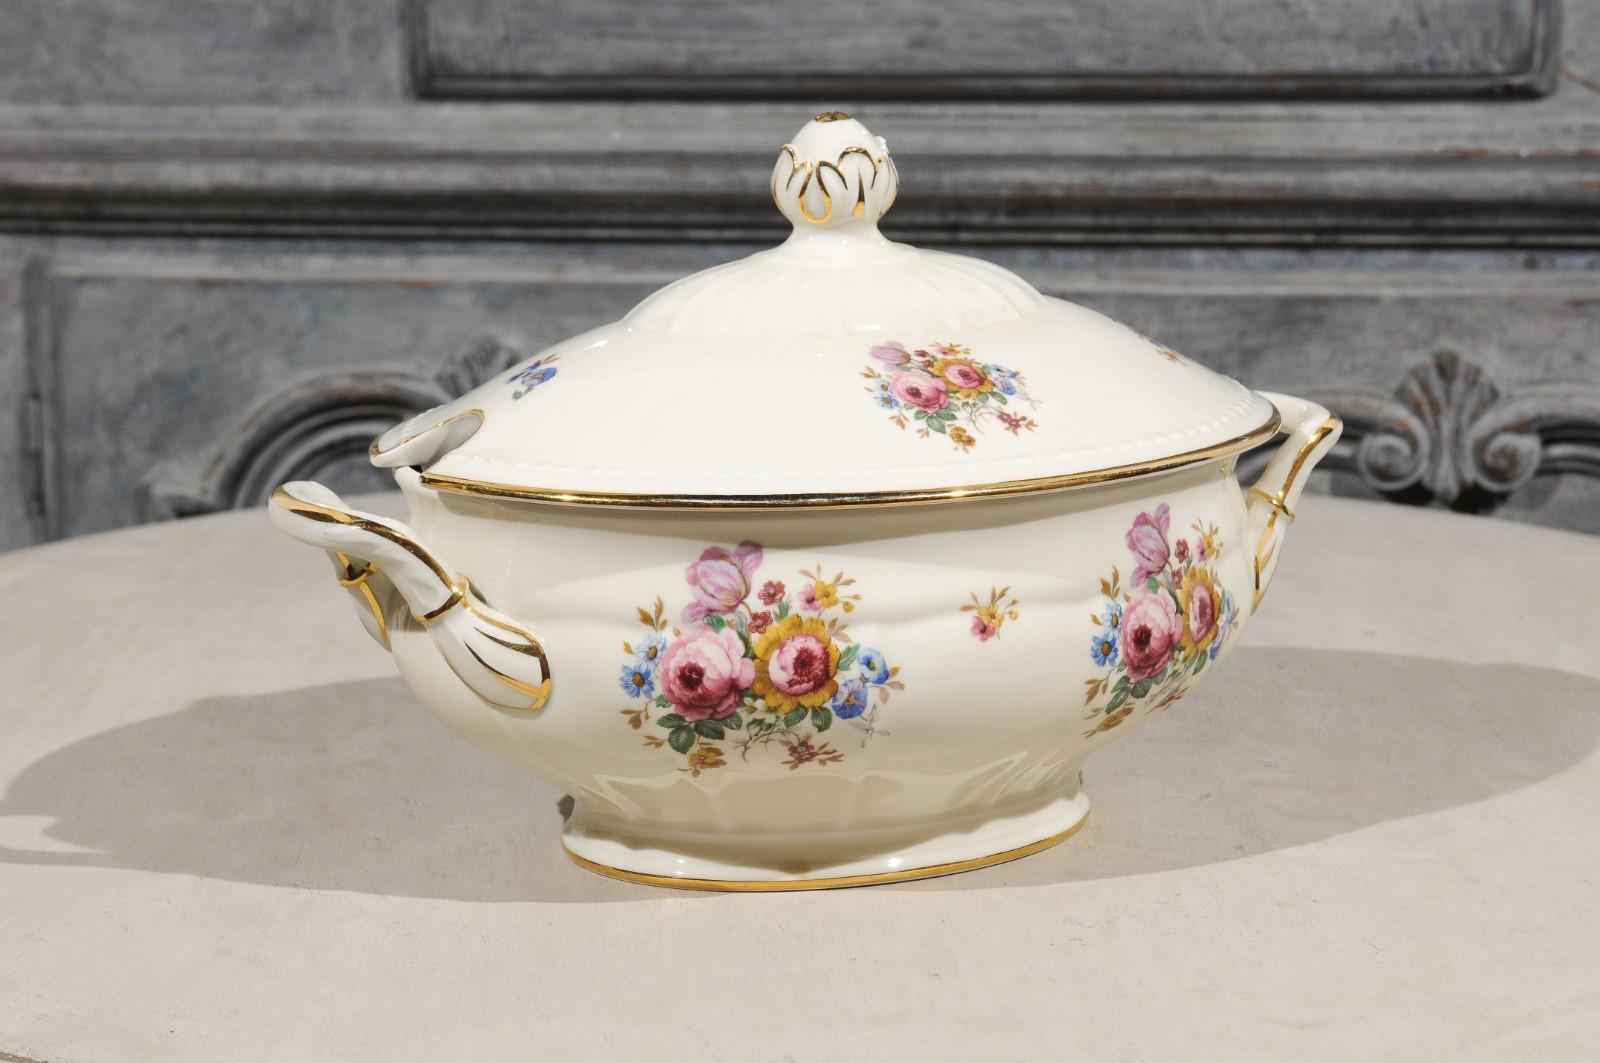 A Danish porcelain Kjøbenhavns Porcellains Maleri soup tureen from the first half of the 20th century, with lid and floral decor. Born in Denmark during the early 20th century, this lovely soup tureen features an oval lid with raised finial,